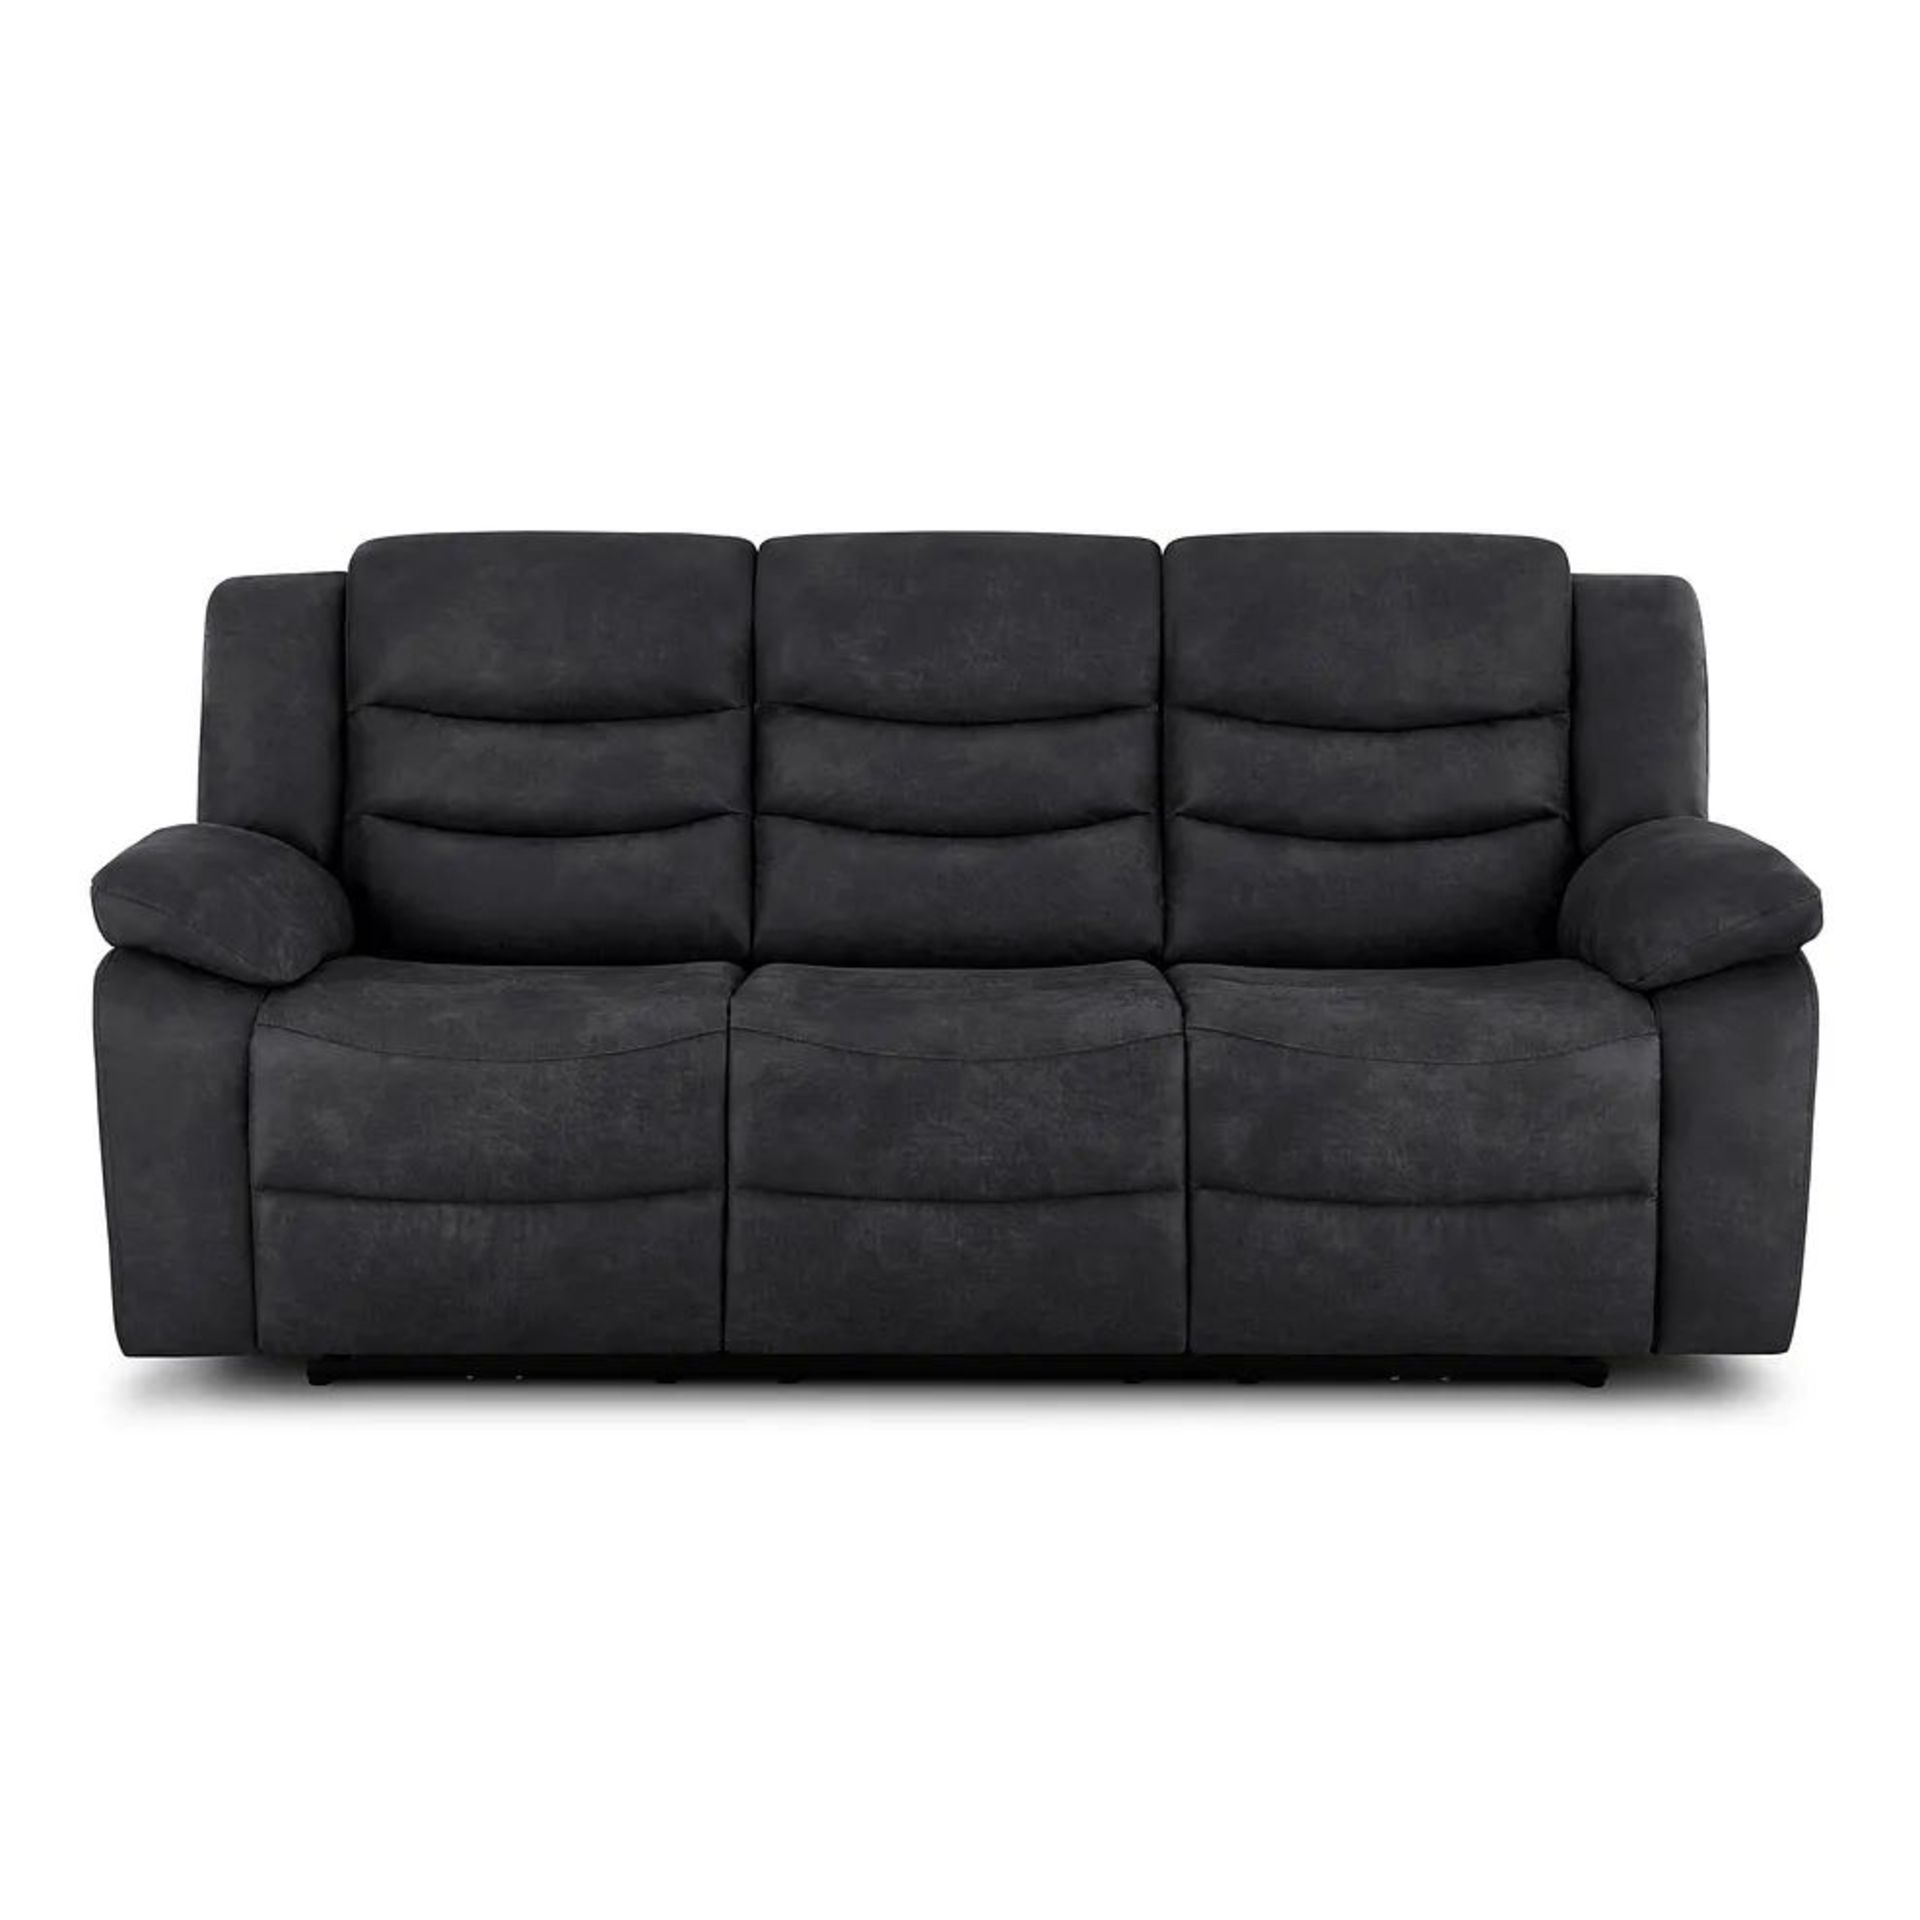 BRAND NEW MARLOW 3 Seater Electric Recliner Sofa - MILLER GREY FABRIC. RRP £1199. Designed to suit - Image 2 of 12